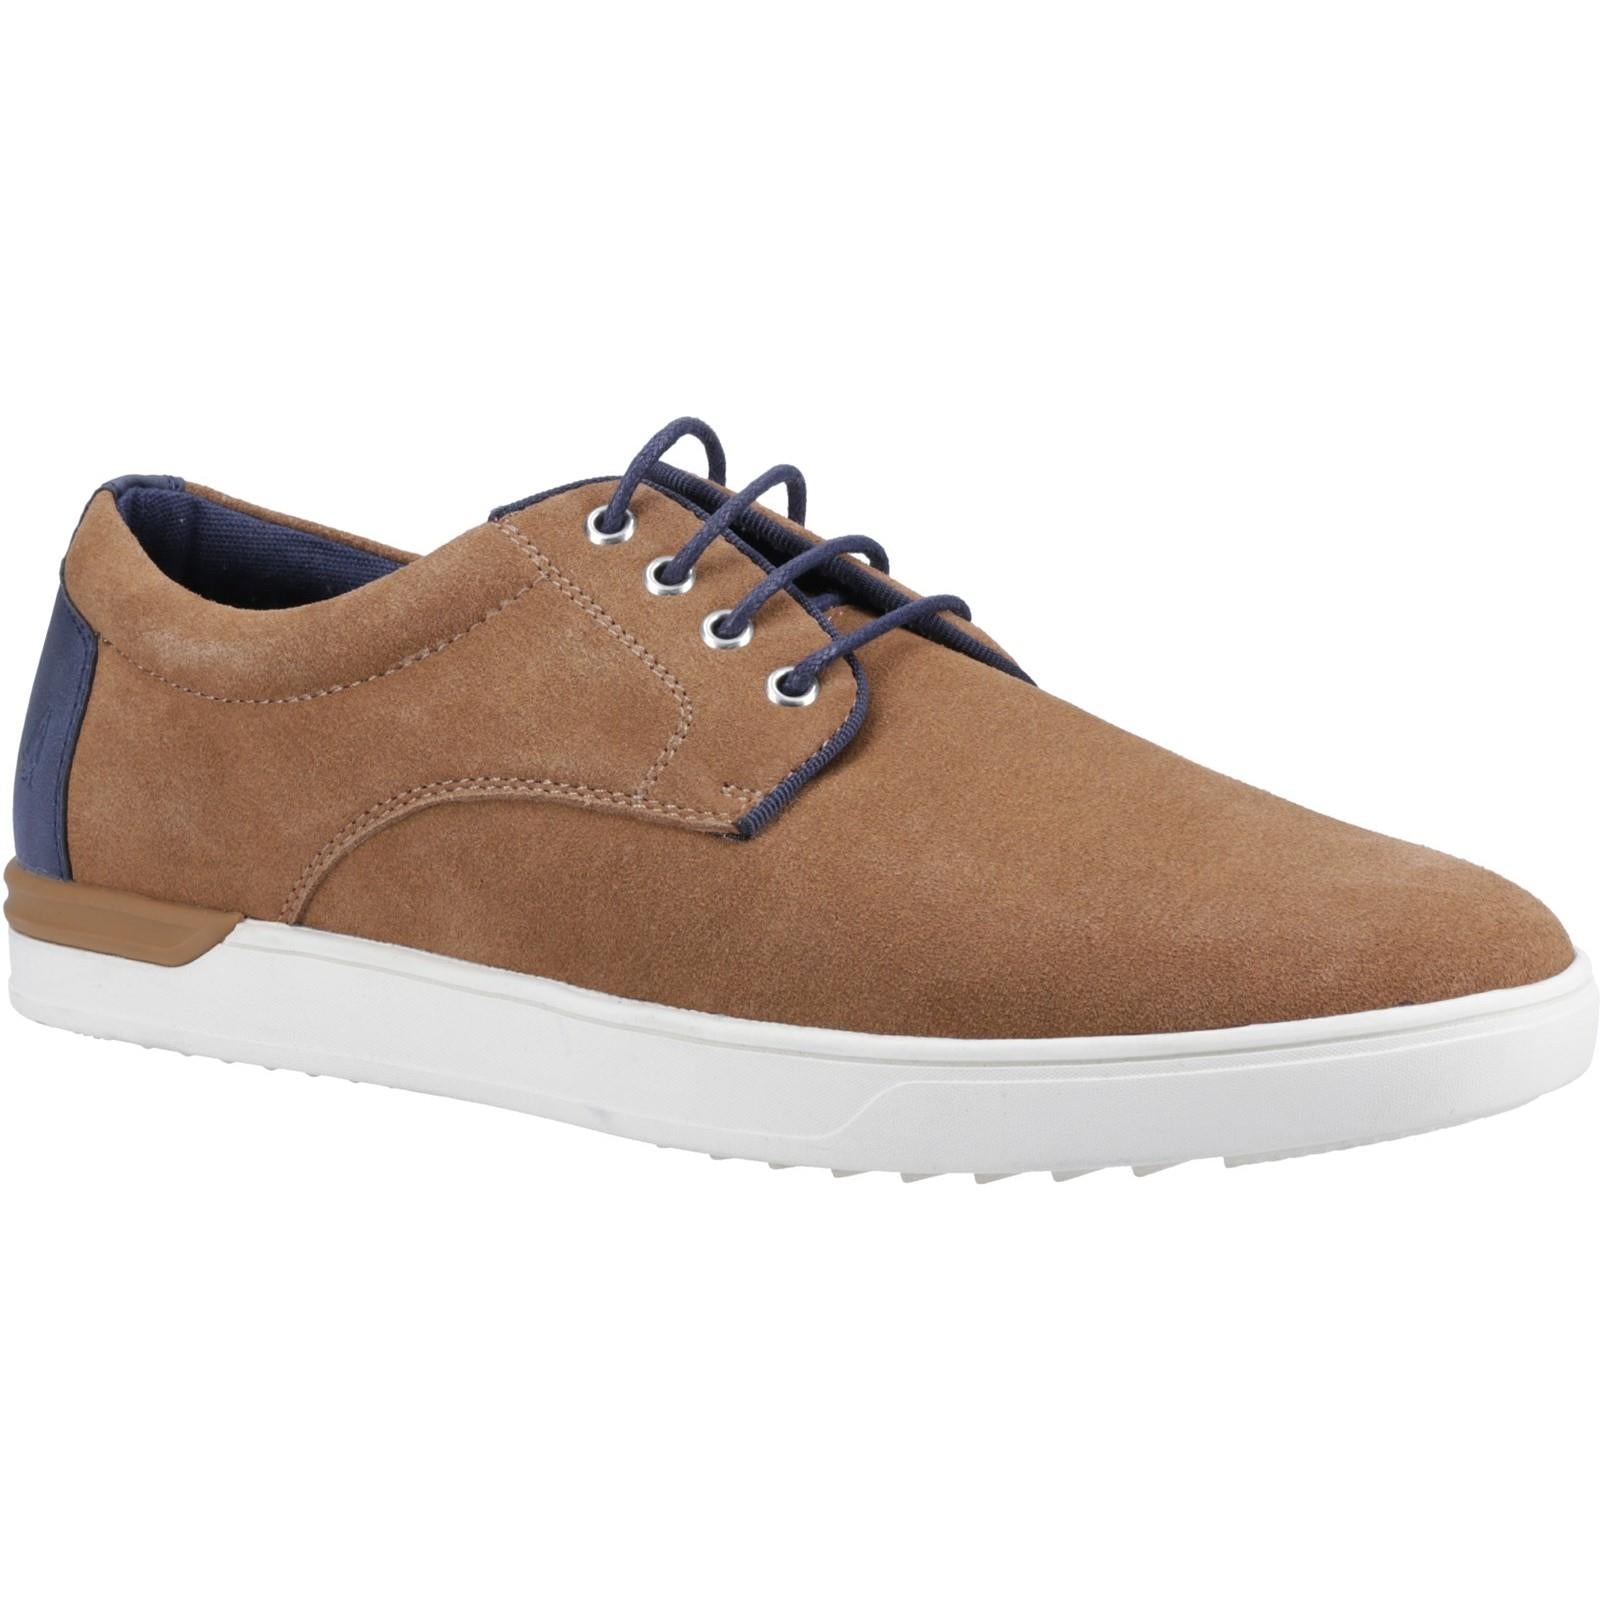 Hush Puppies Joey tan suede memory foam lace up canvas shoes